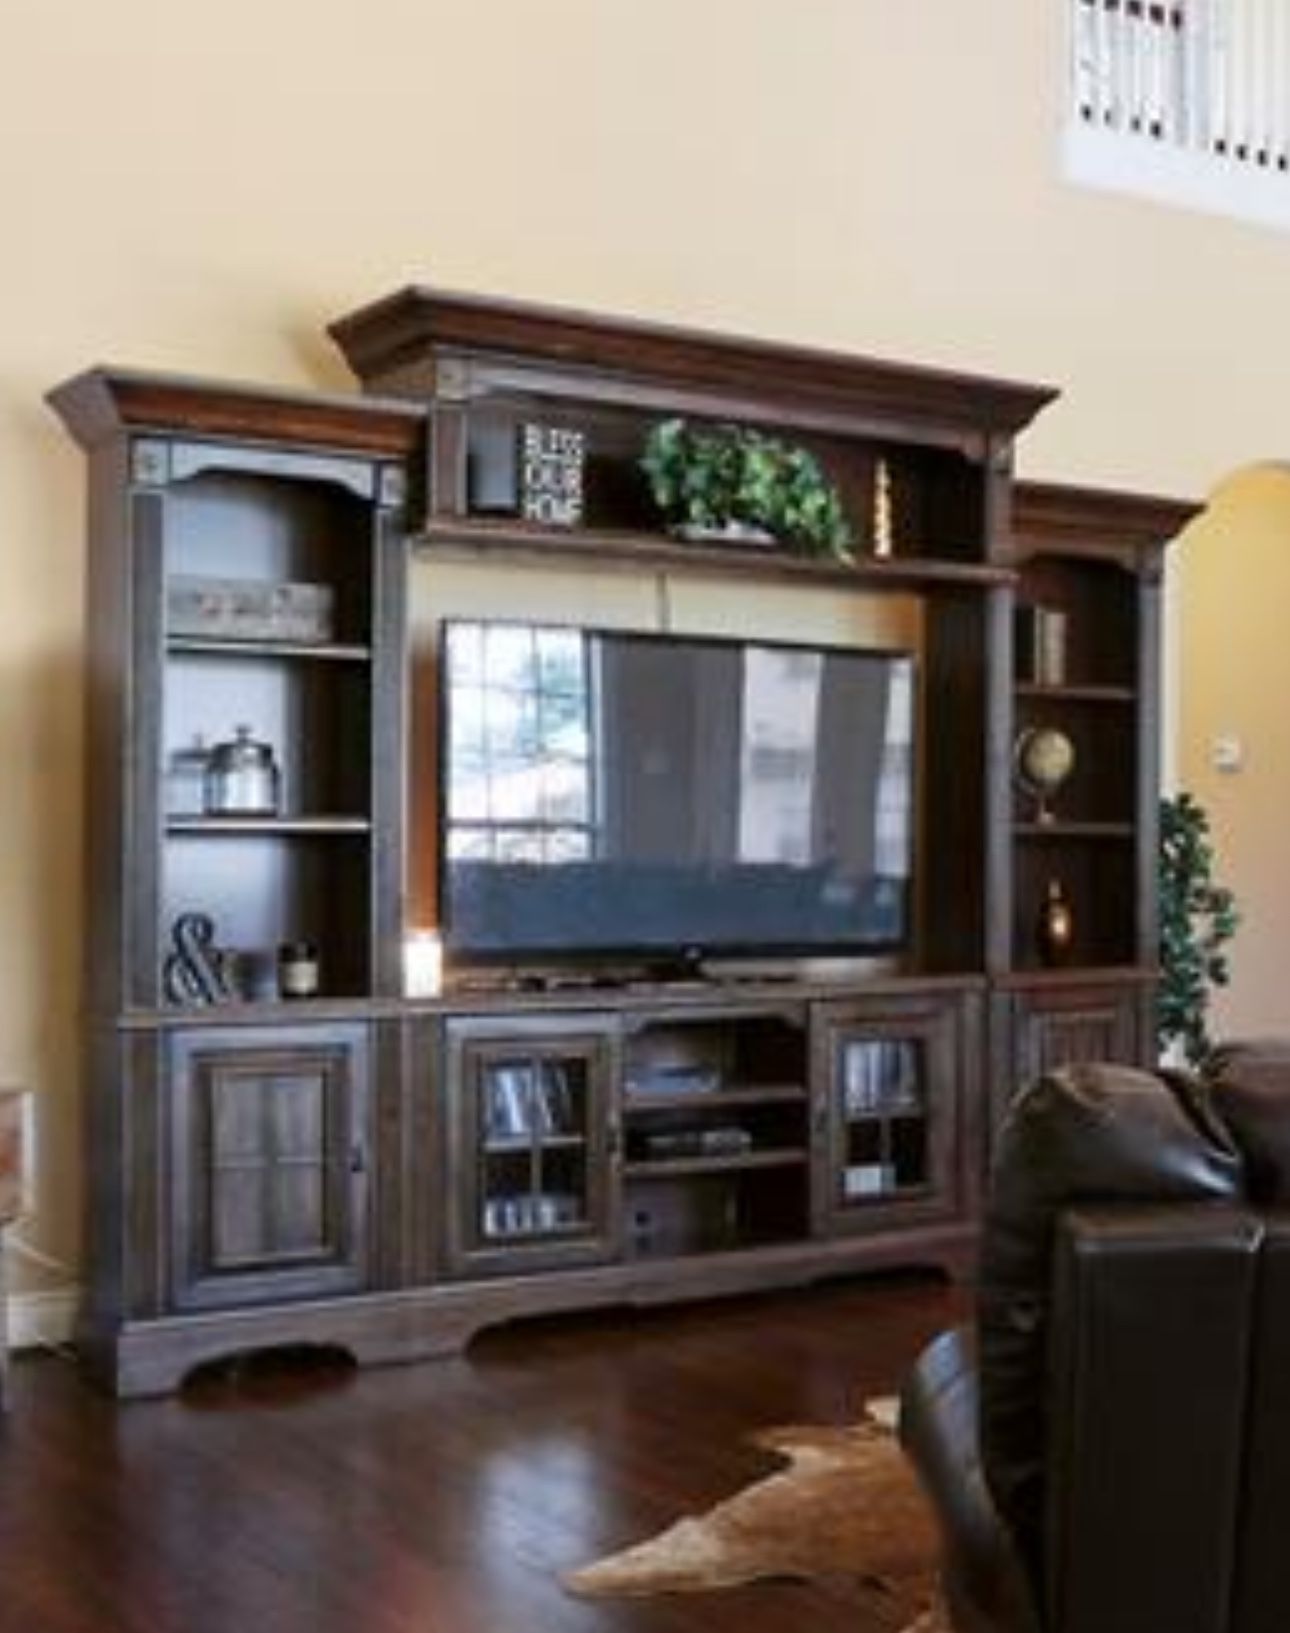 Rooms to Go Large Dark Cherry Wood Entertainment Center/Console/Wall Unit